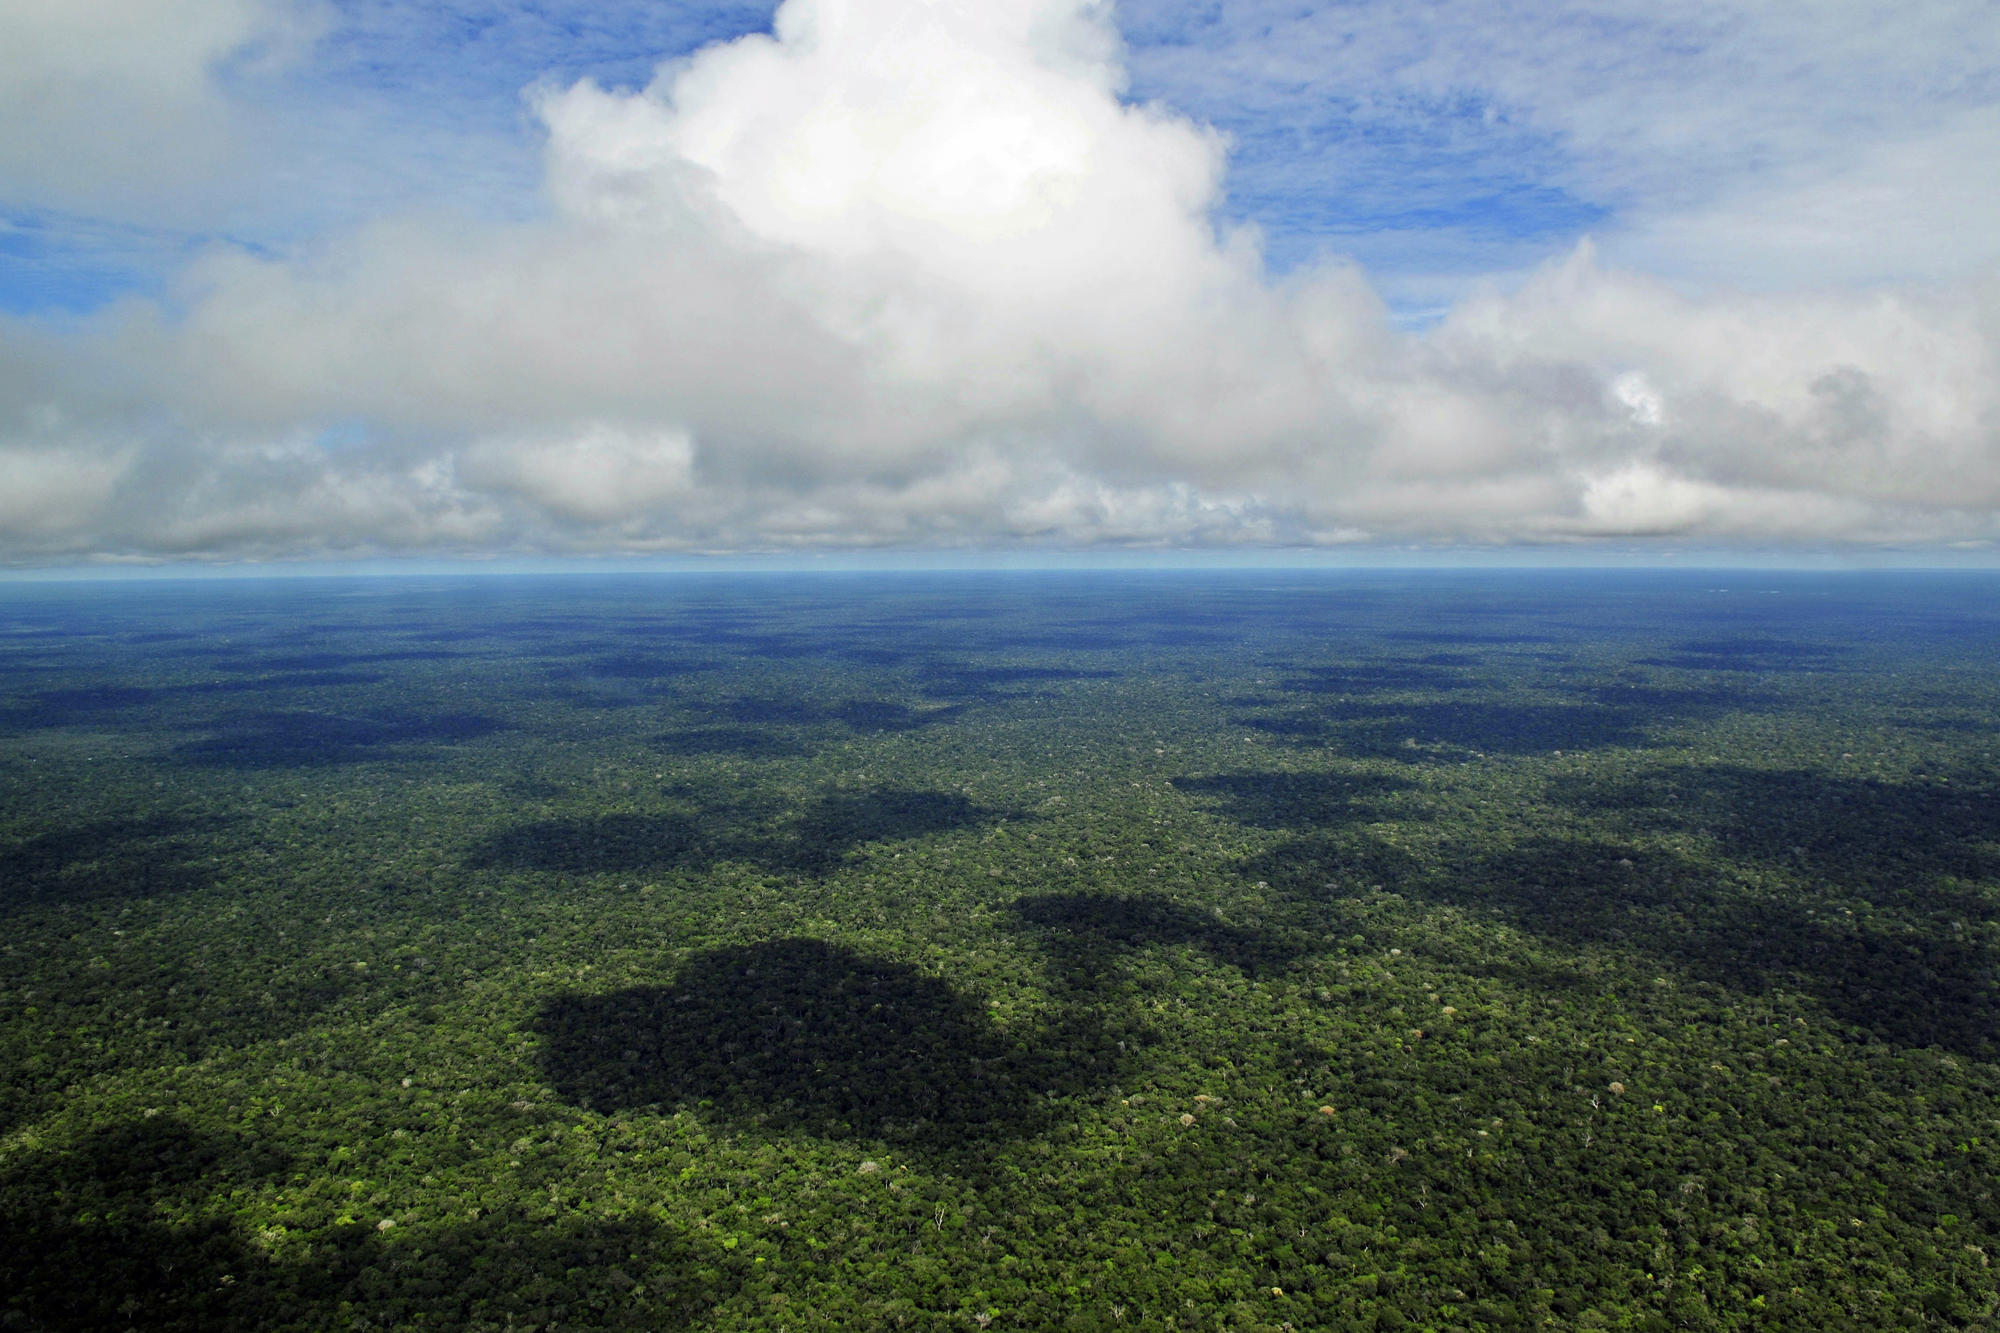 As the Earth’s “green lung,” the Brazilian rainforest absorbs large amounts of climate-damaging carbon dioxide through photosynthesis.